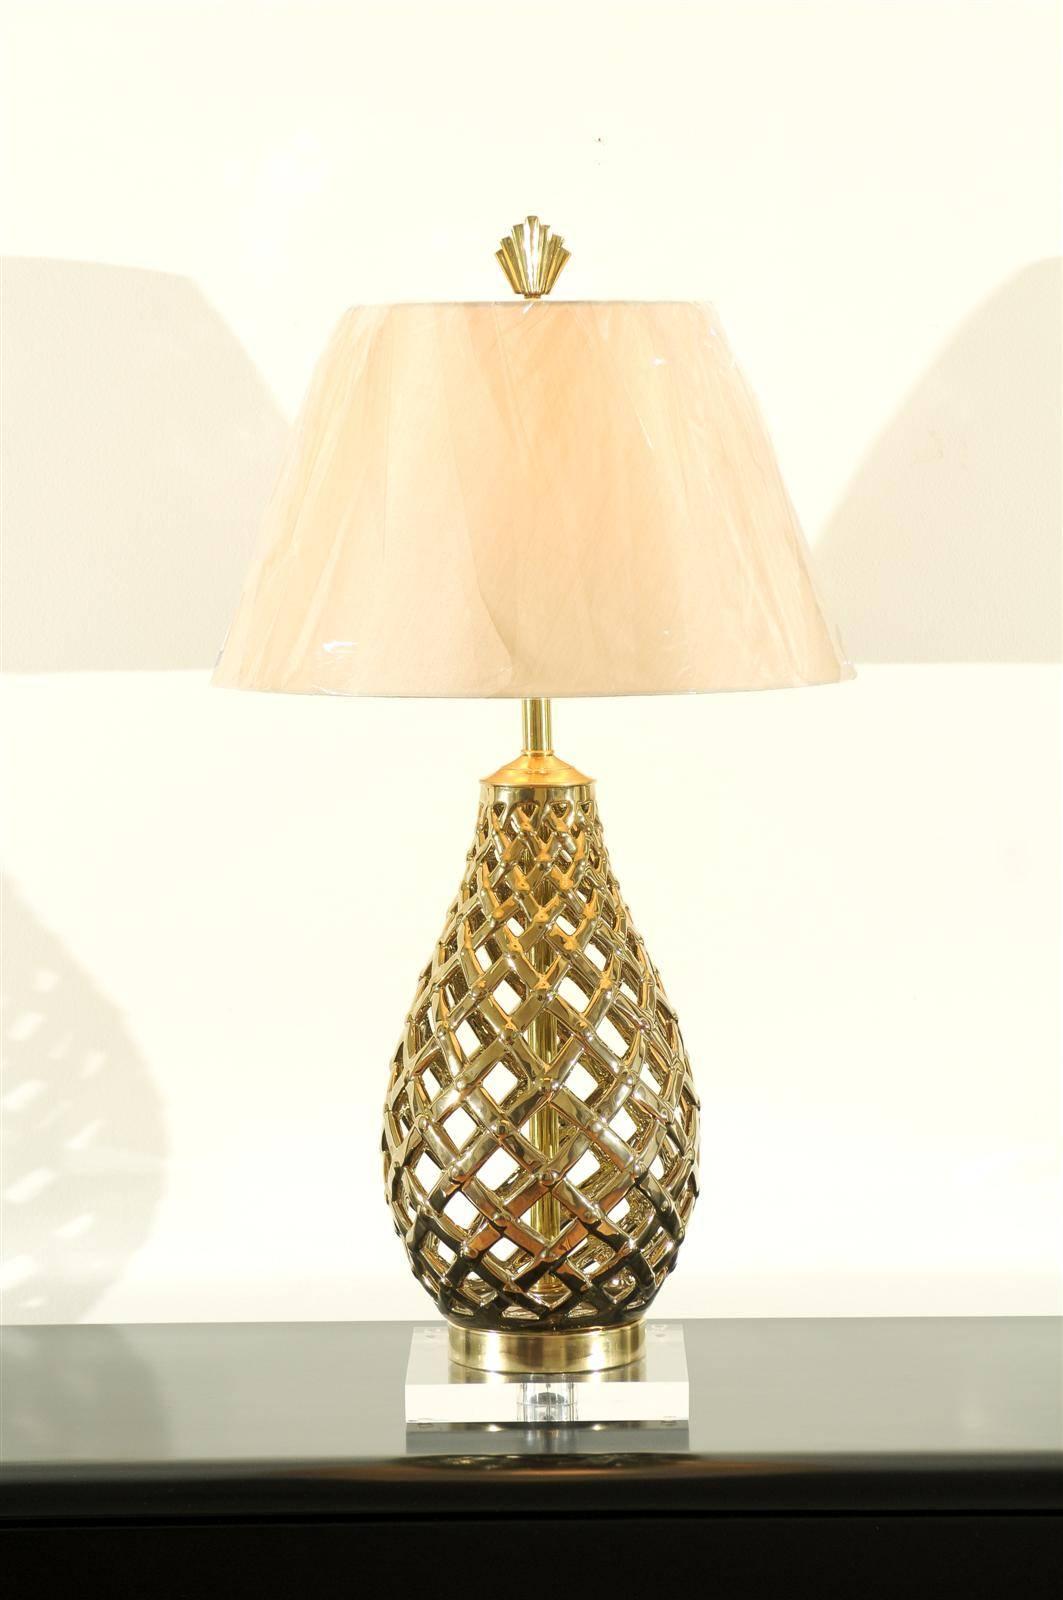 A beautiful pair of vintage lamps, circa 1980. Pierced ceramic vessels glazed to portray the look of solid brass, with solid brass accents, atop a Lucite base. Fabulous design and quality. Exquisite jewelry! Excellent restored condition. Rewired